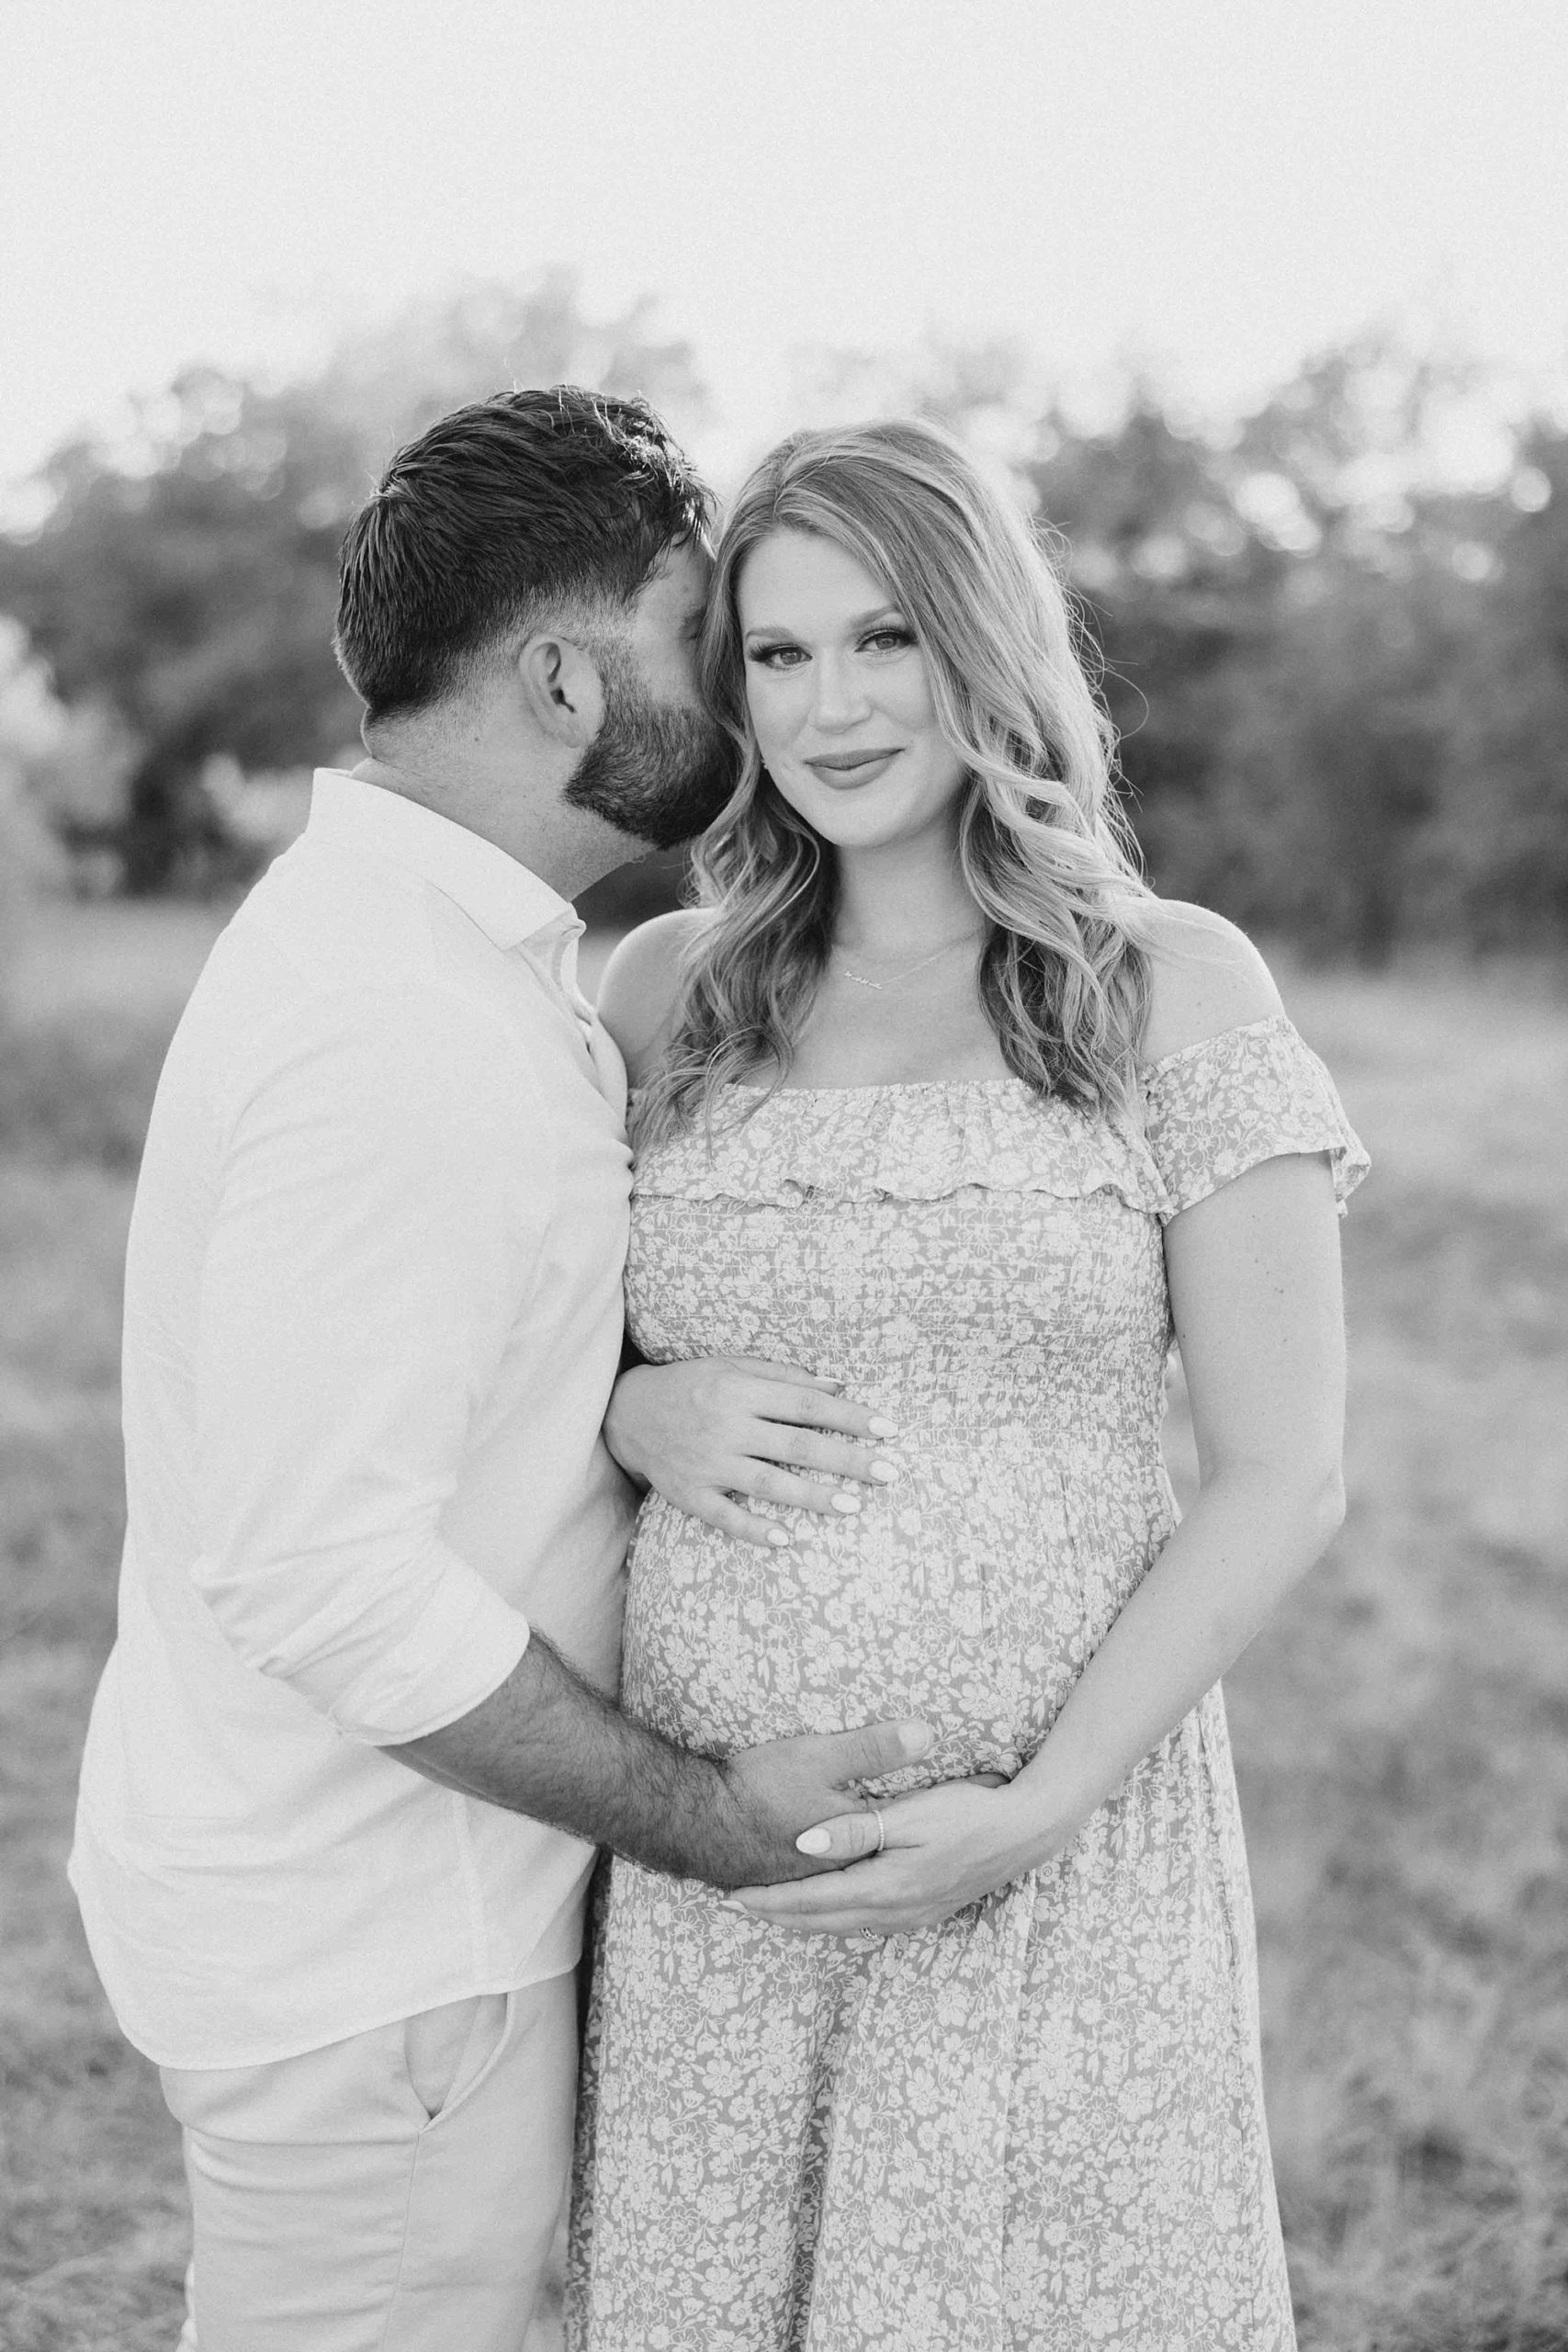 man kisses wife's cheek during Murrell Park maternity session